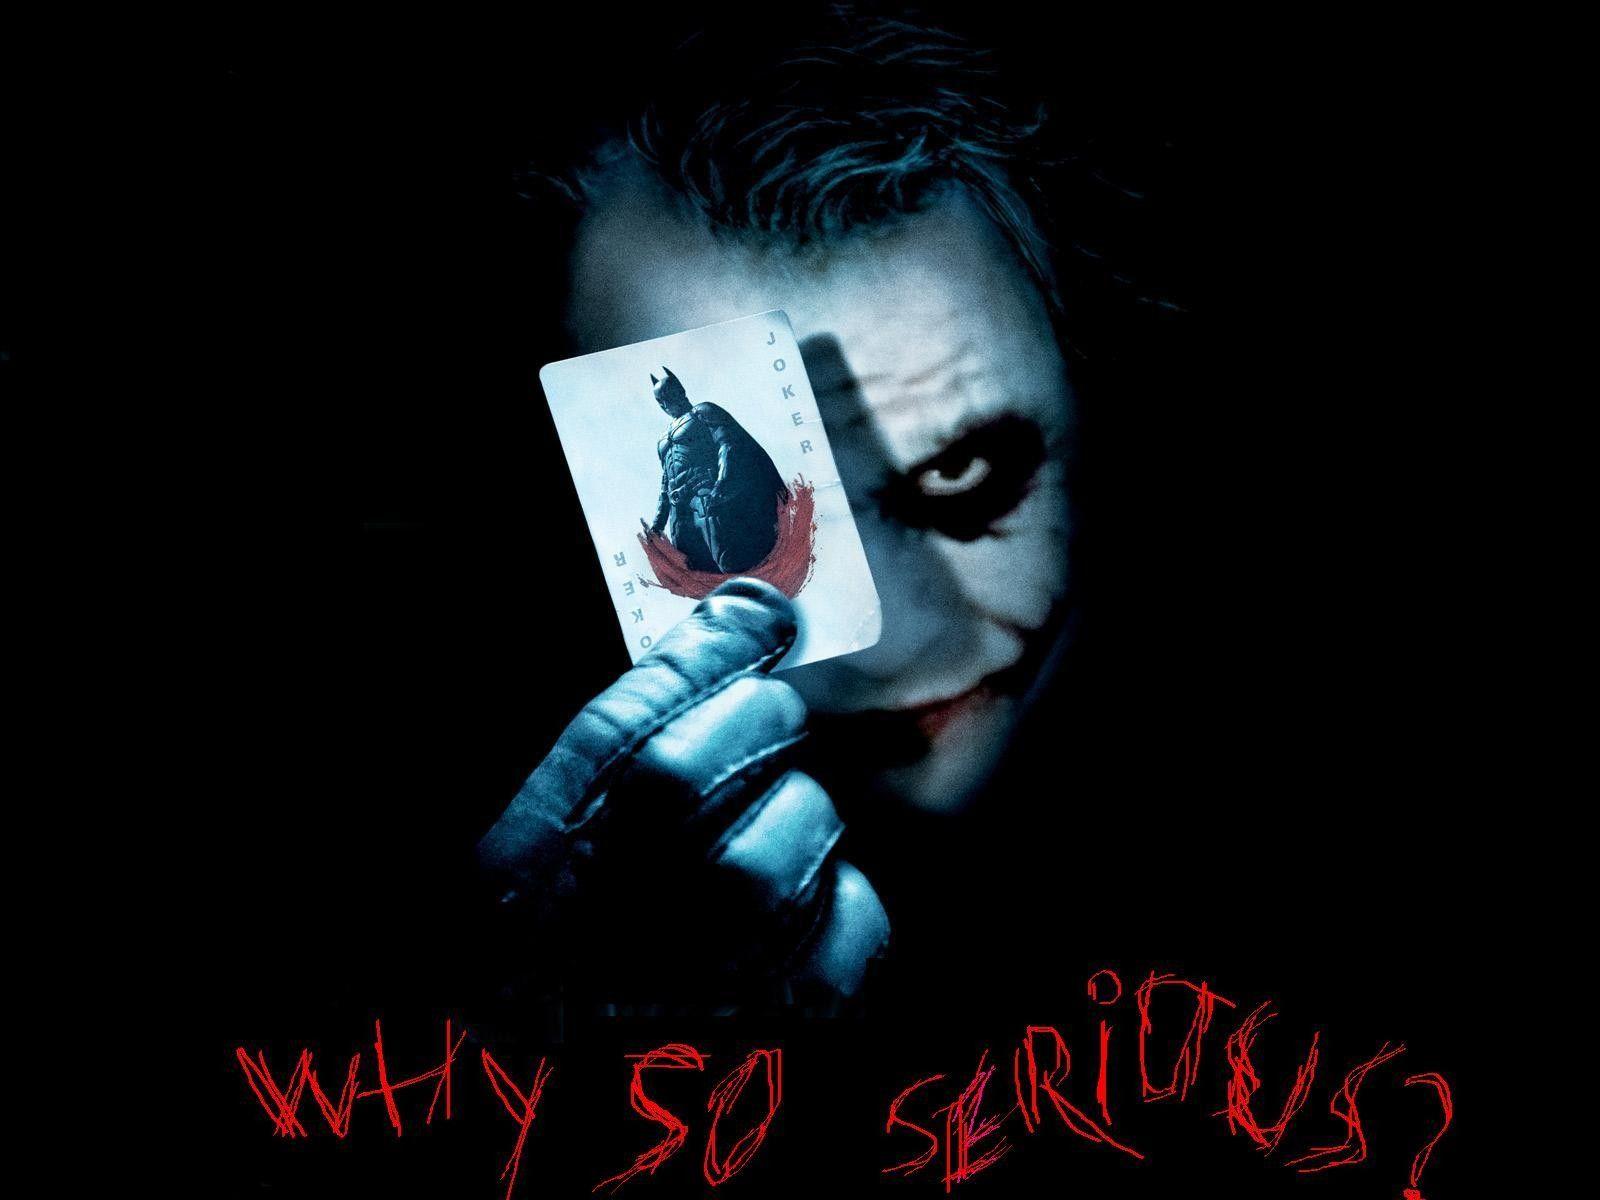 Joker Wallpaper why so Serious for iPhone